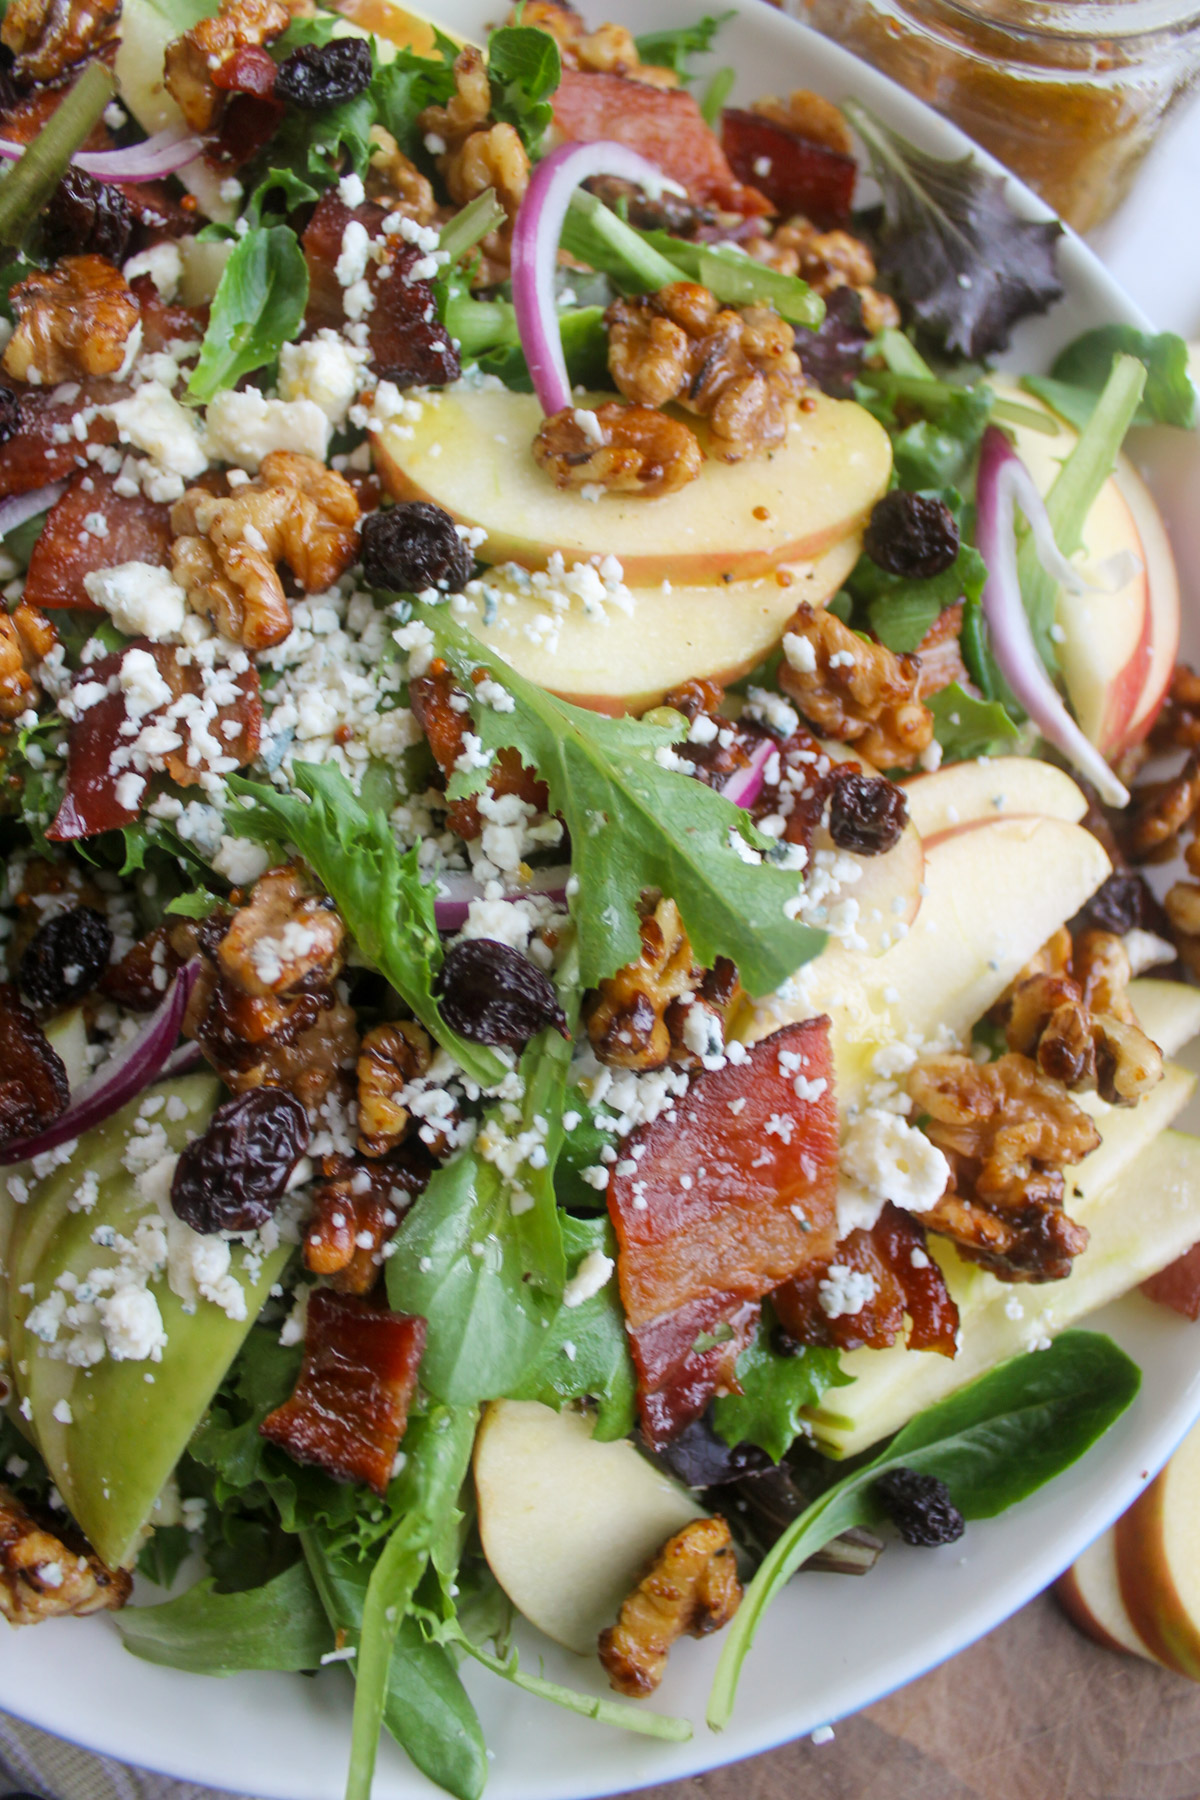 An apple salad on a platter with bacon, raisins, walnuts and blue cheese.